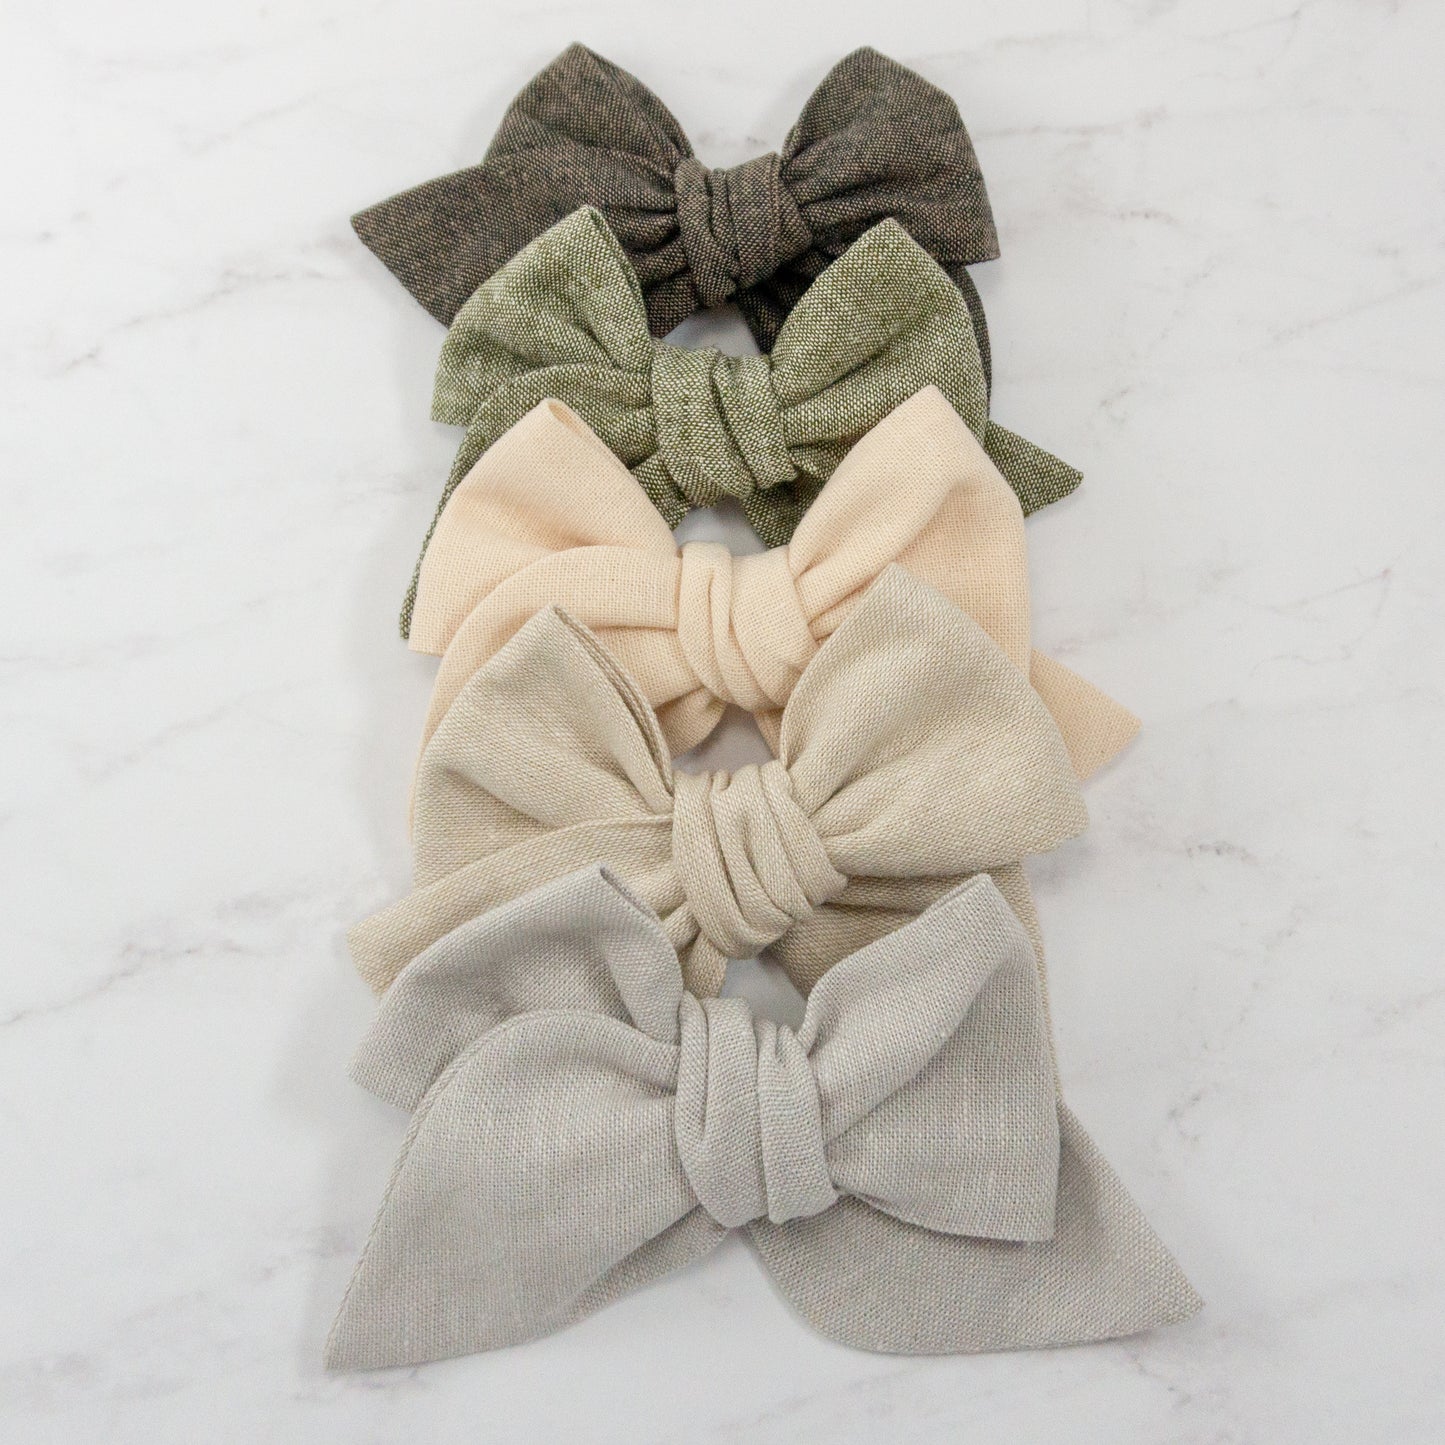 Handtied Fabric Bow - Essex Linen - Oyster